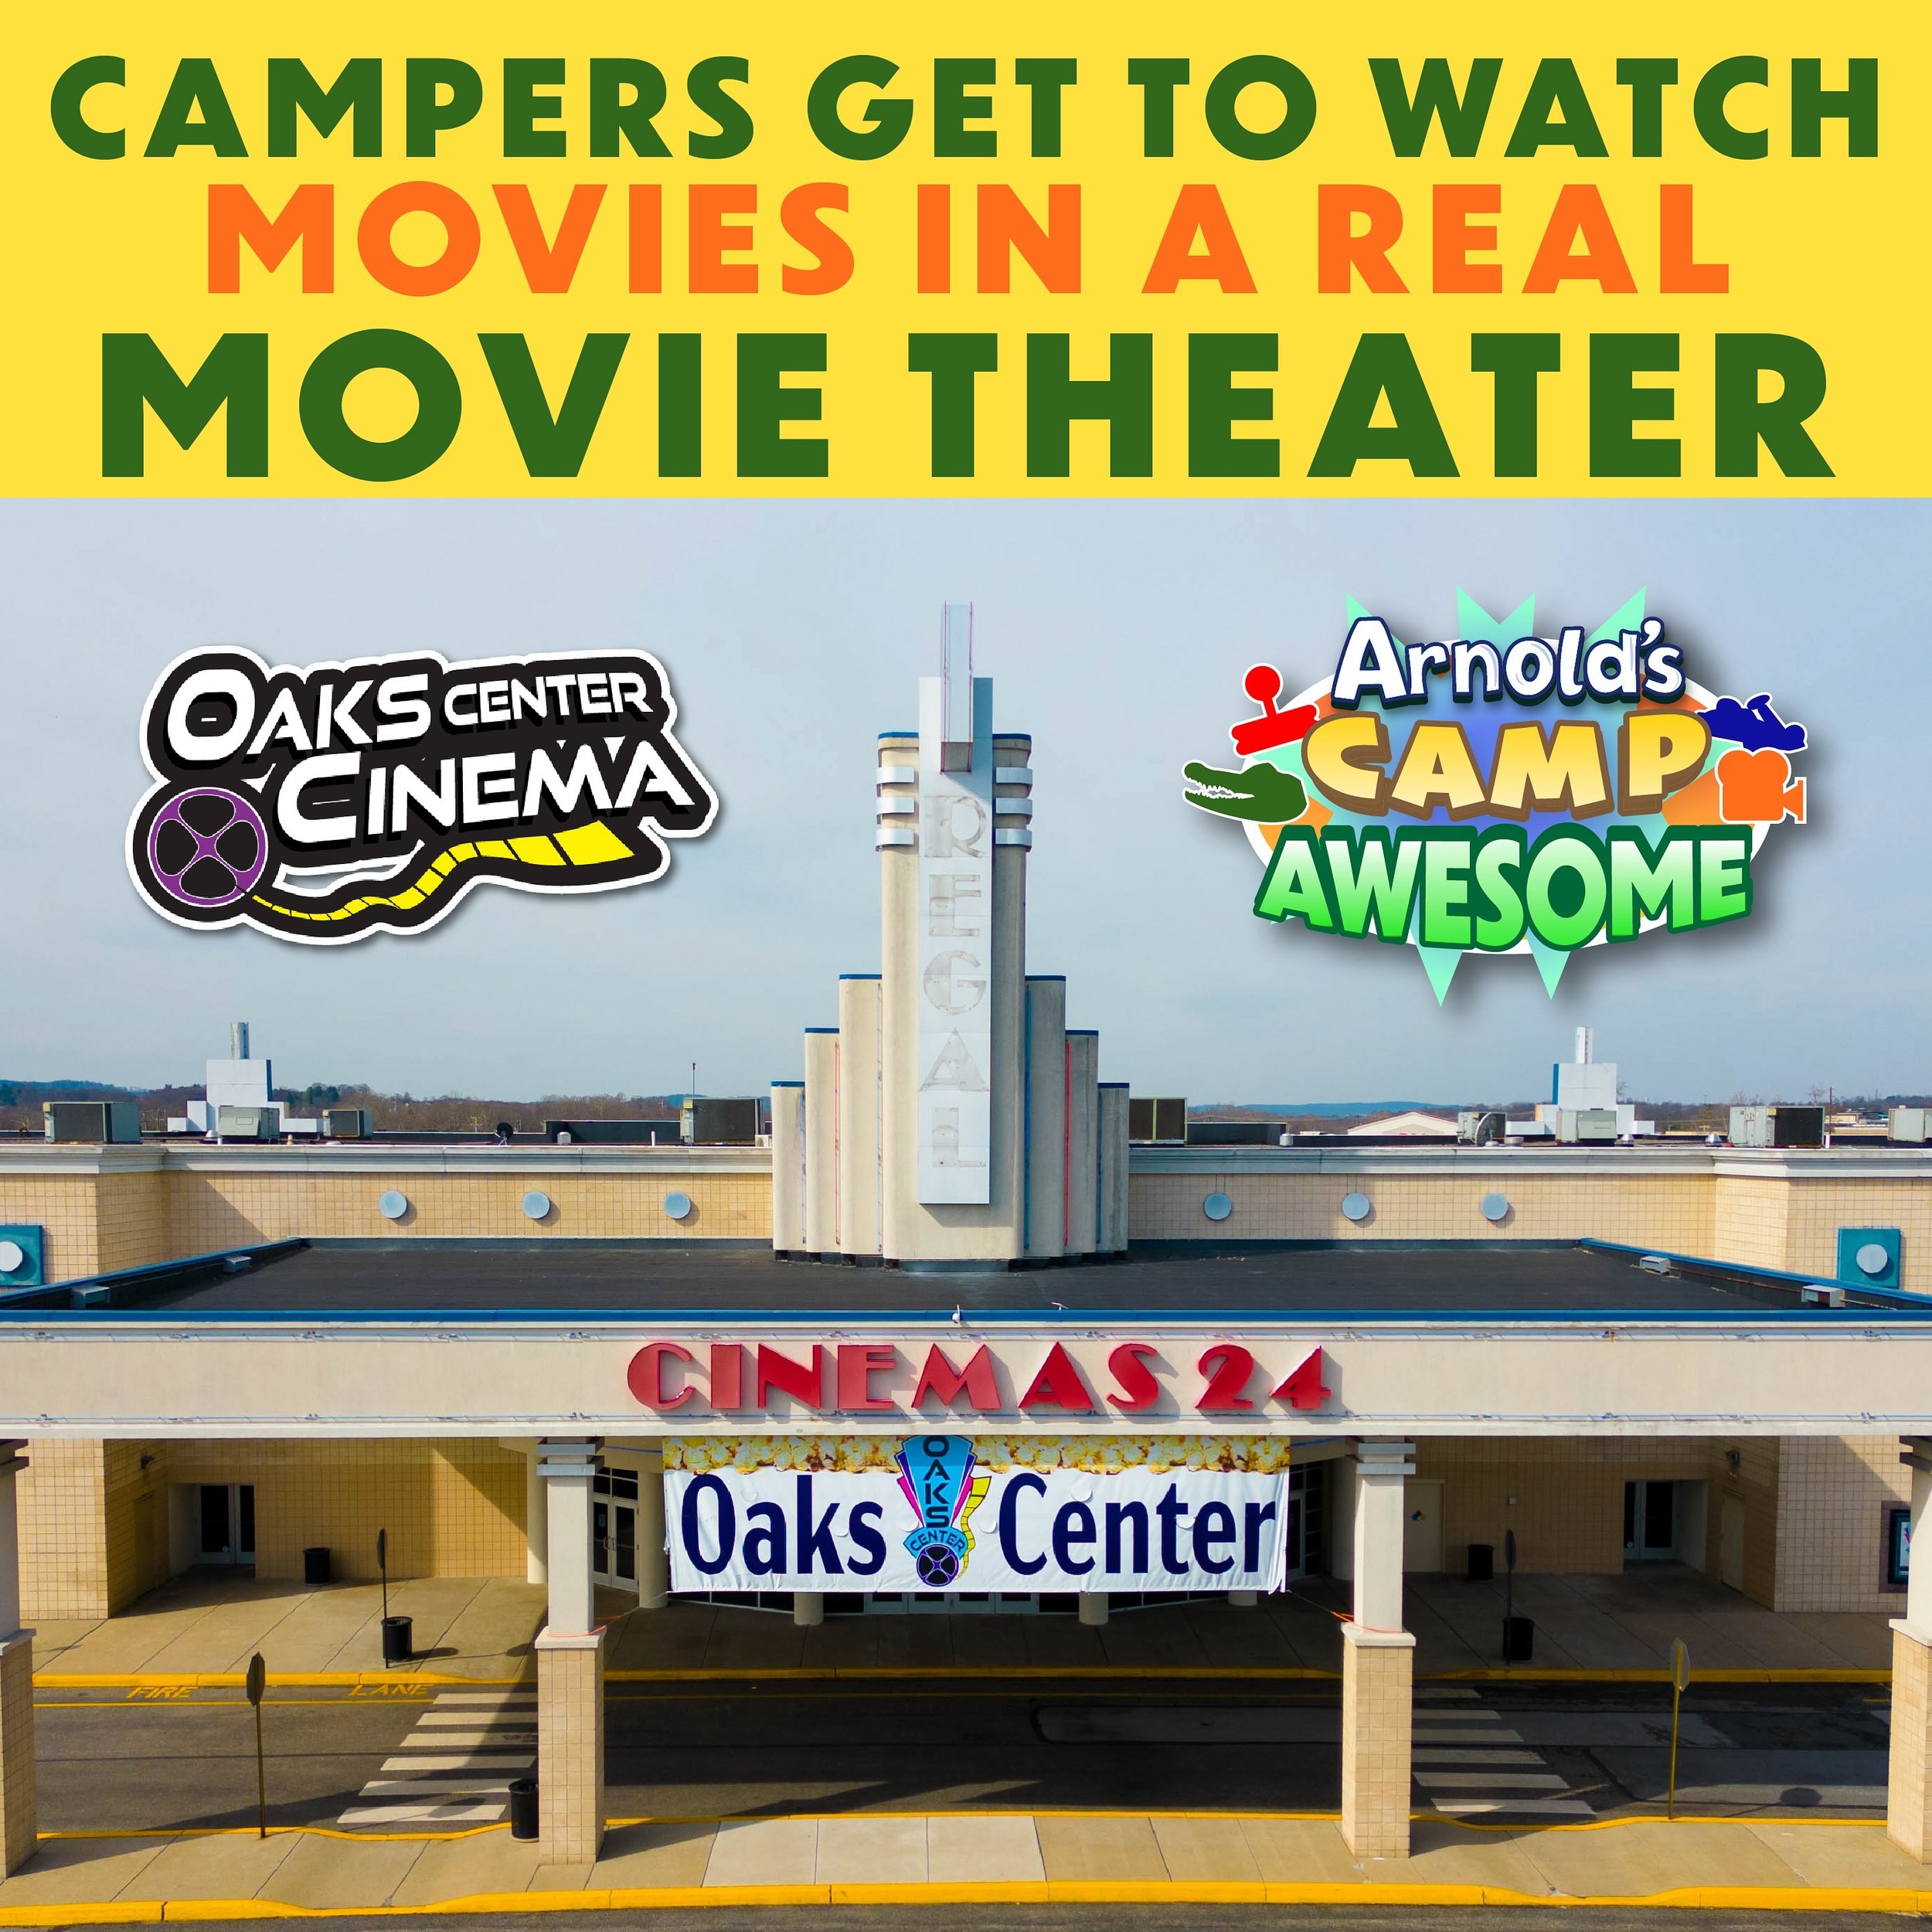 🍿&ldquo;Movie day&rdquo; at camp is usually just a tv on wheels&hellip;. Not at Arnold&rsquo;s Camp Awesome!

Campers will get to watch movies the proper way! In a REAL movie theater with trips to @oakscentercinema 
Register your camper today at Arn